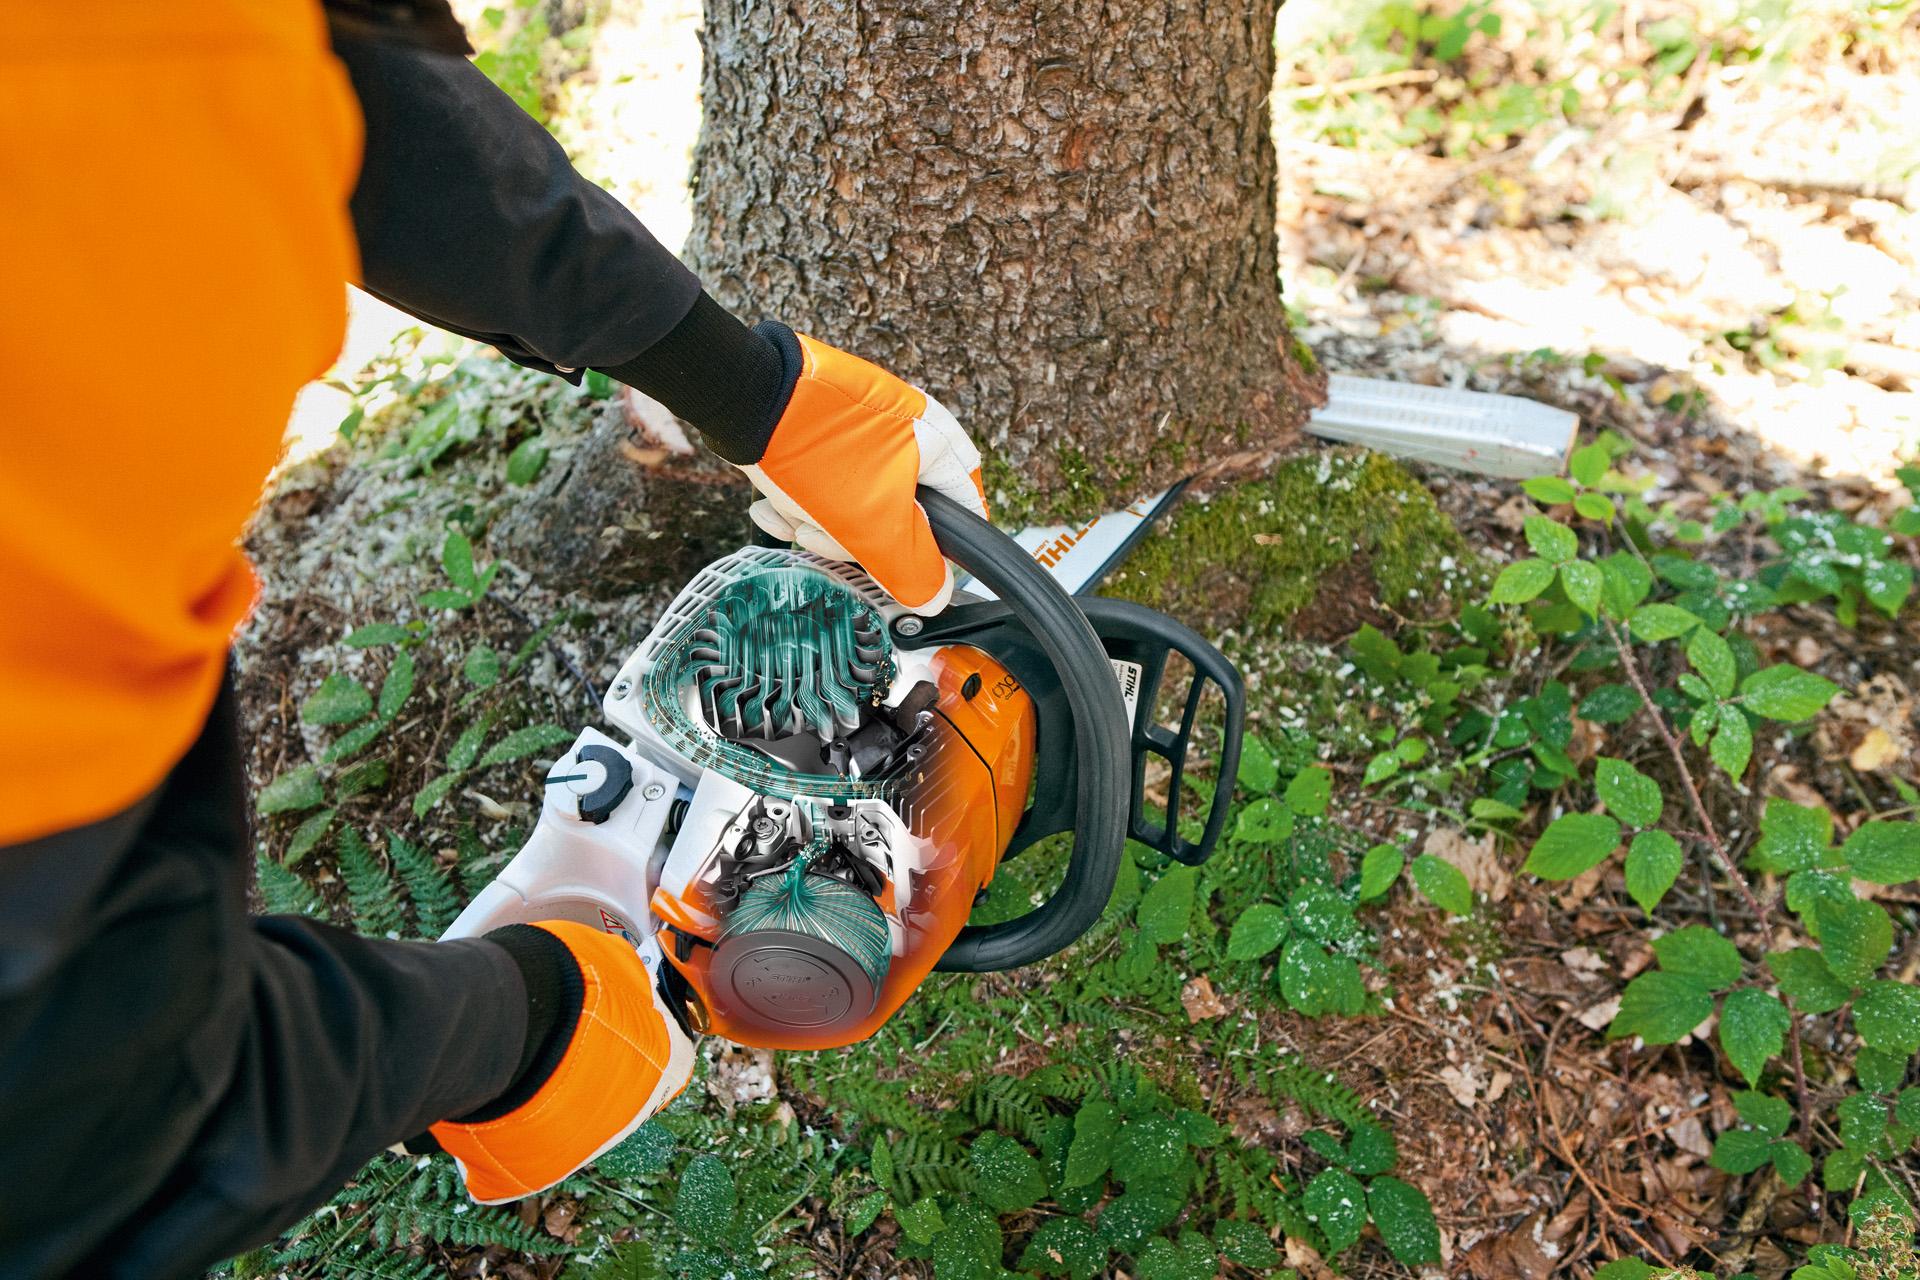 A STIHL MS 241 C-M petrol chainsaw being used to cut through a tree trunk